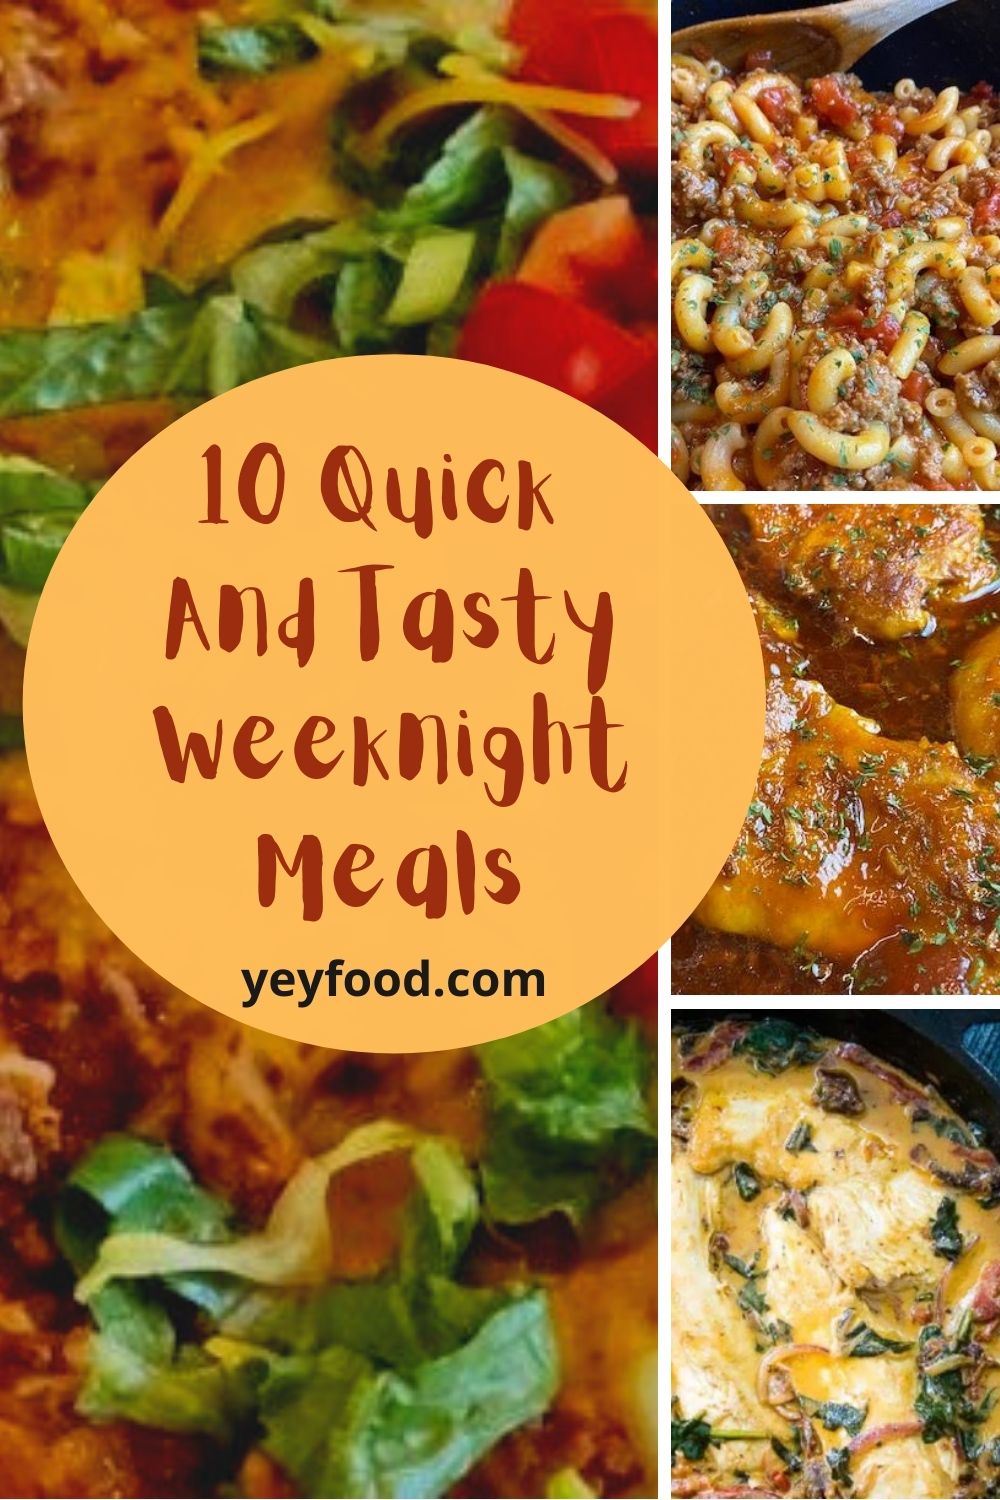 10 Quick Weeknight Meals That Are Terrifically Tasty - yeyfood.com